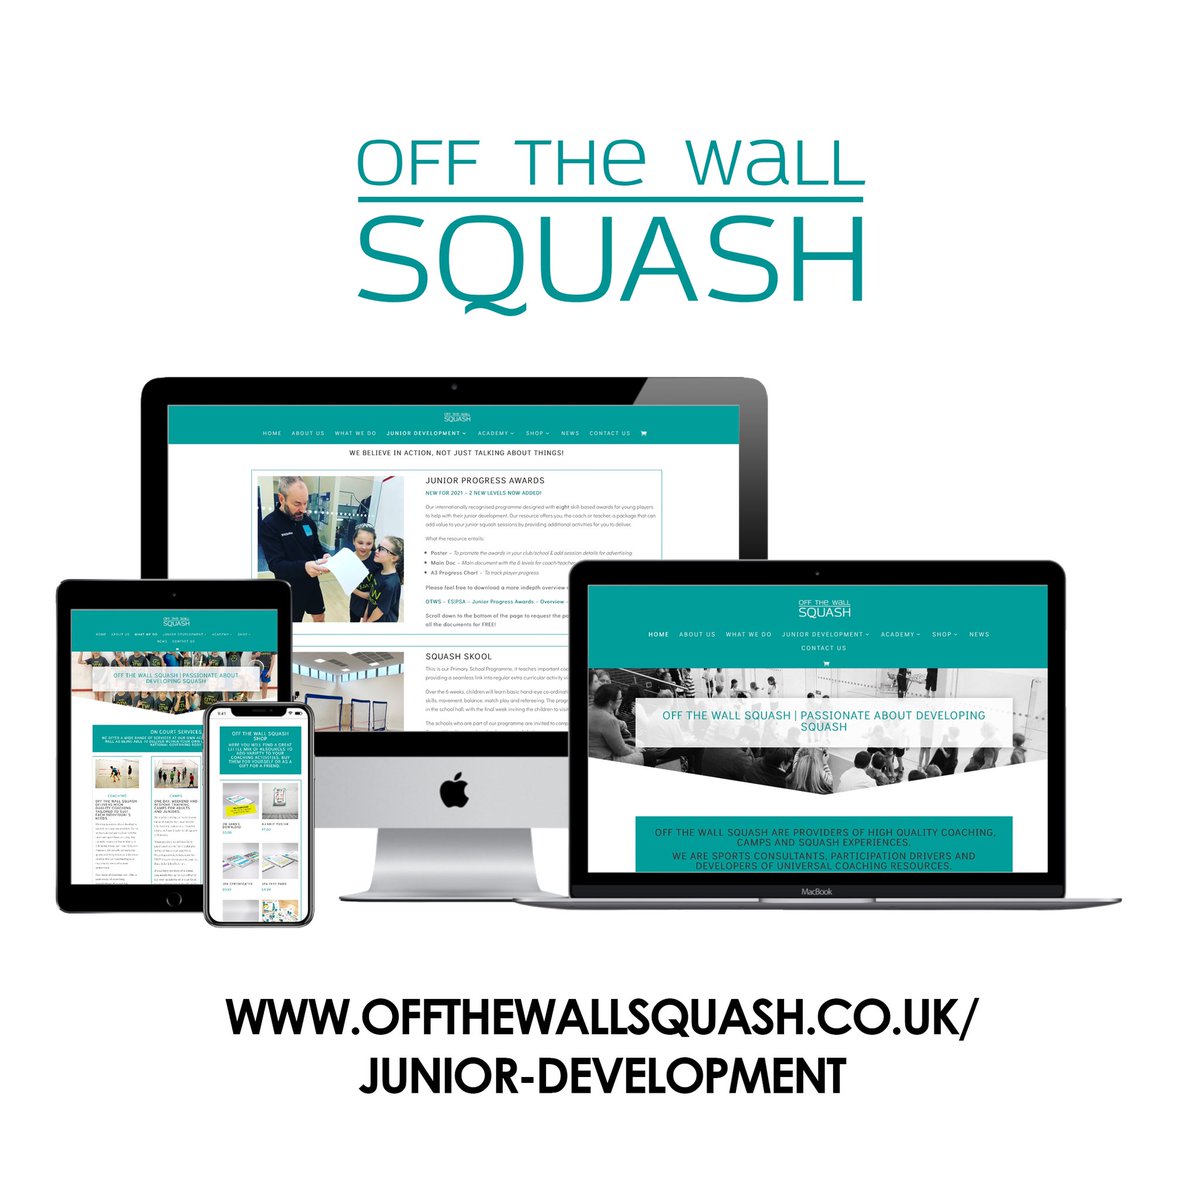 NEW FOR 2021 - The Junior Progress Awards have had a makeover! 2 new levels, levels 1-6 refreshed, the resource streamlined & waiting for you to access for FREE! Visit our website for more info: offthewallsquash.co.uk/junior-develop…

#offthewallsquash #juniorprogressawards #coachingresources